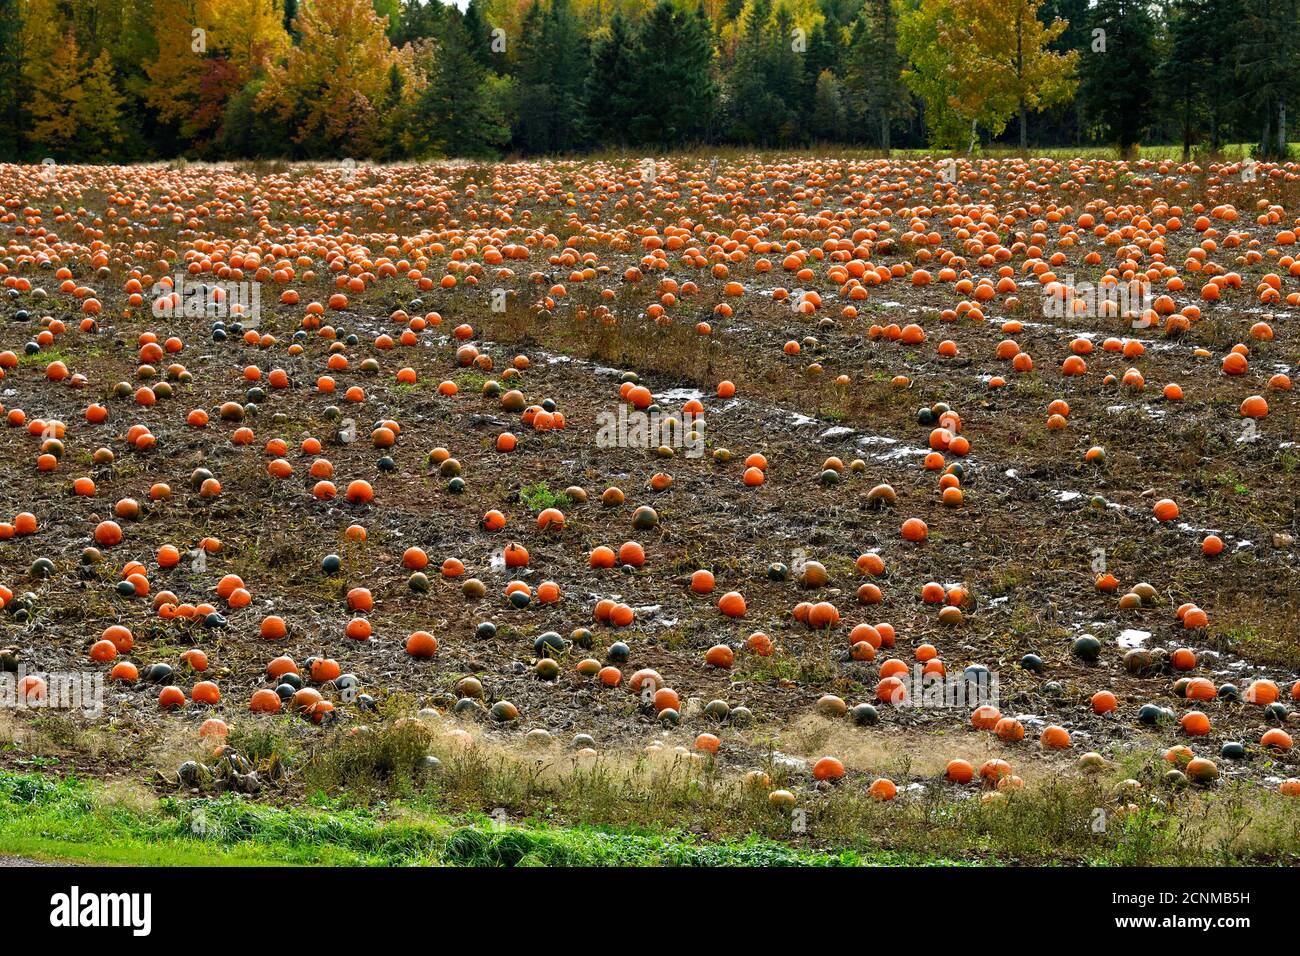 A farm field with a crop of  pumpkins ' Cucurbita pepo', ready for a fall  harvest in rural Sussex New Brunswick Canada Stock Photo